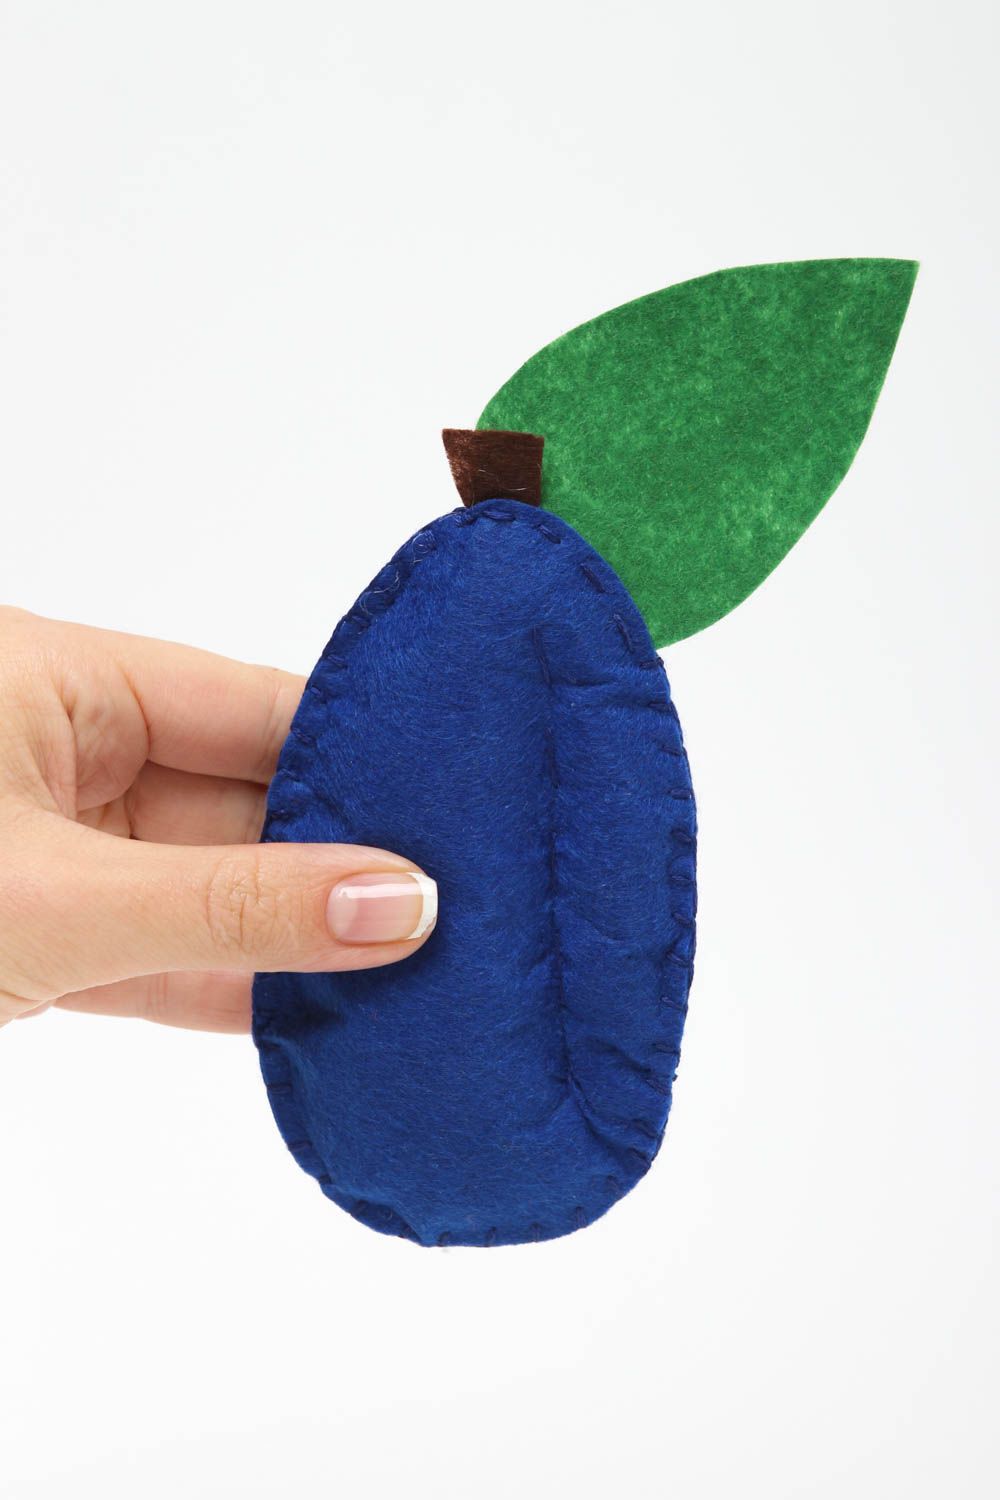 Unusual handmade soft toy fruit toys best toys for kids room decor ideas photo 5